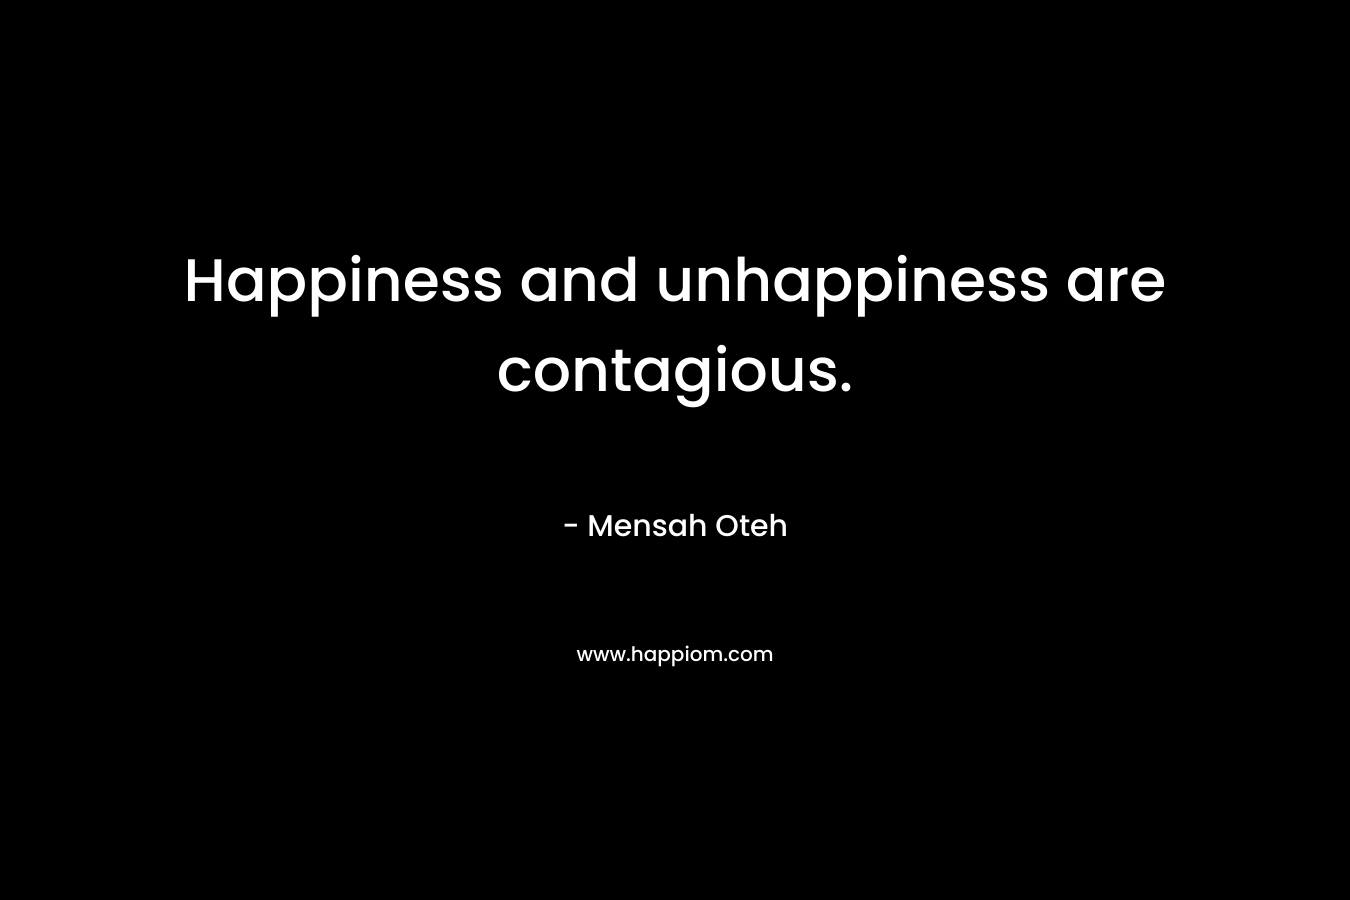 Happiness and unhappiness are contagious.